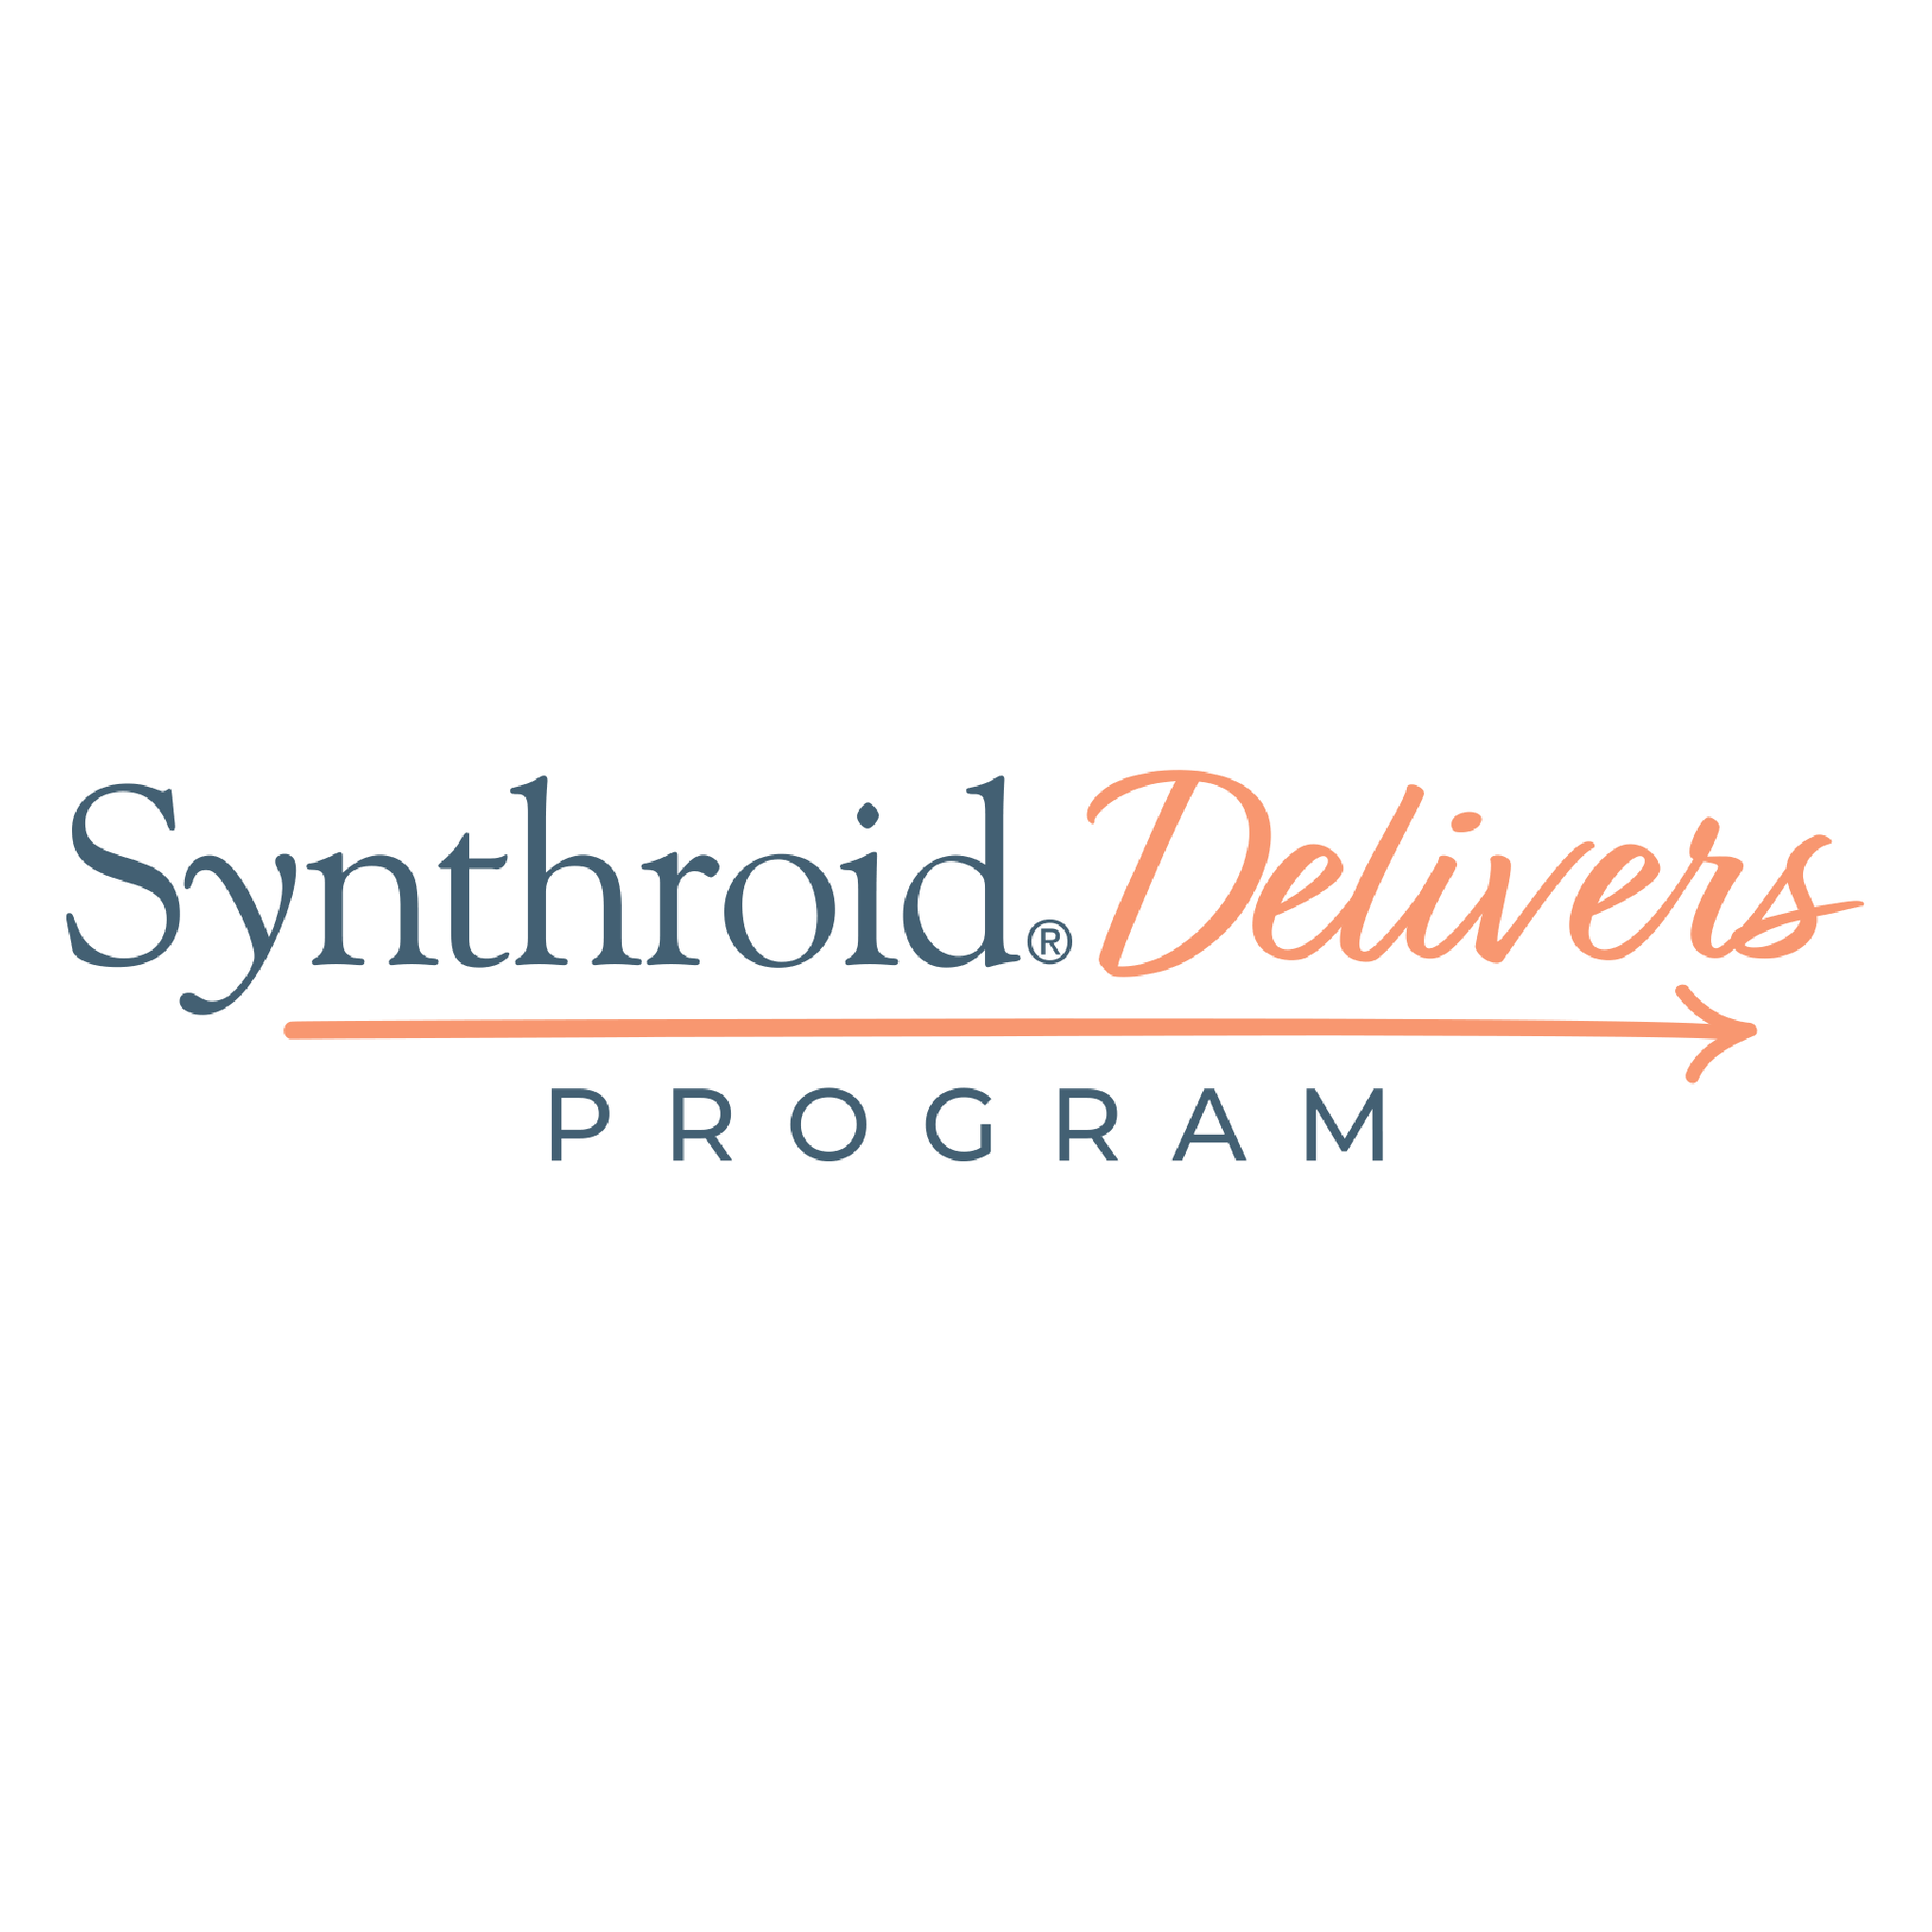 Synthroid Delivers